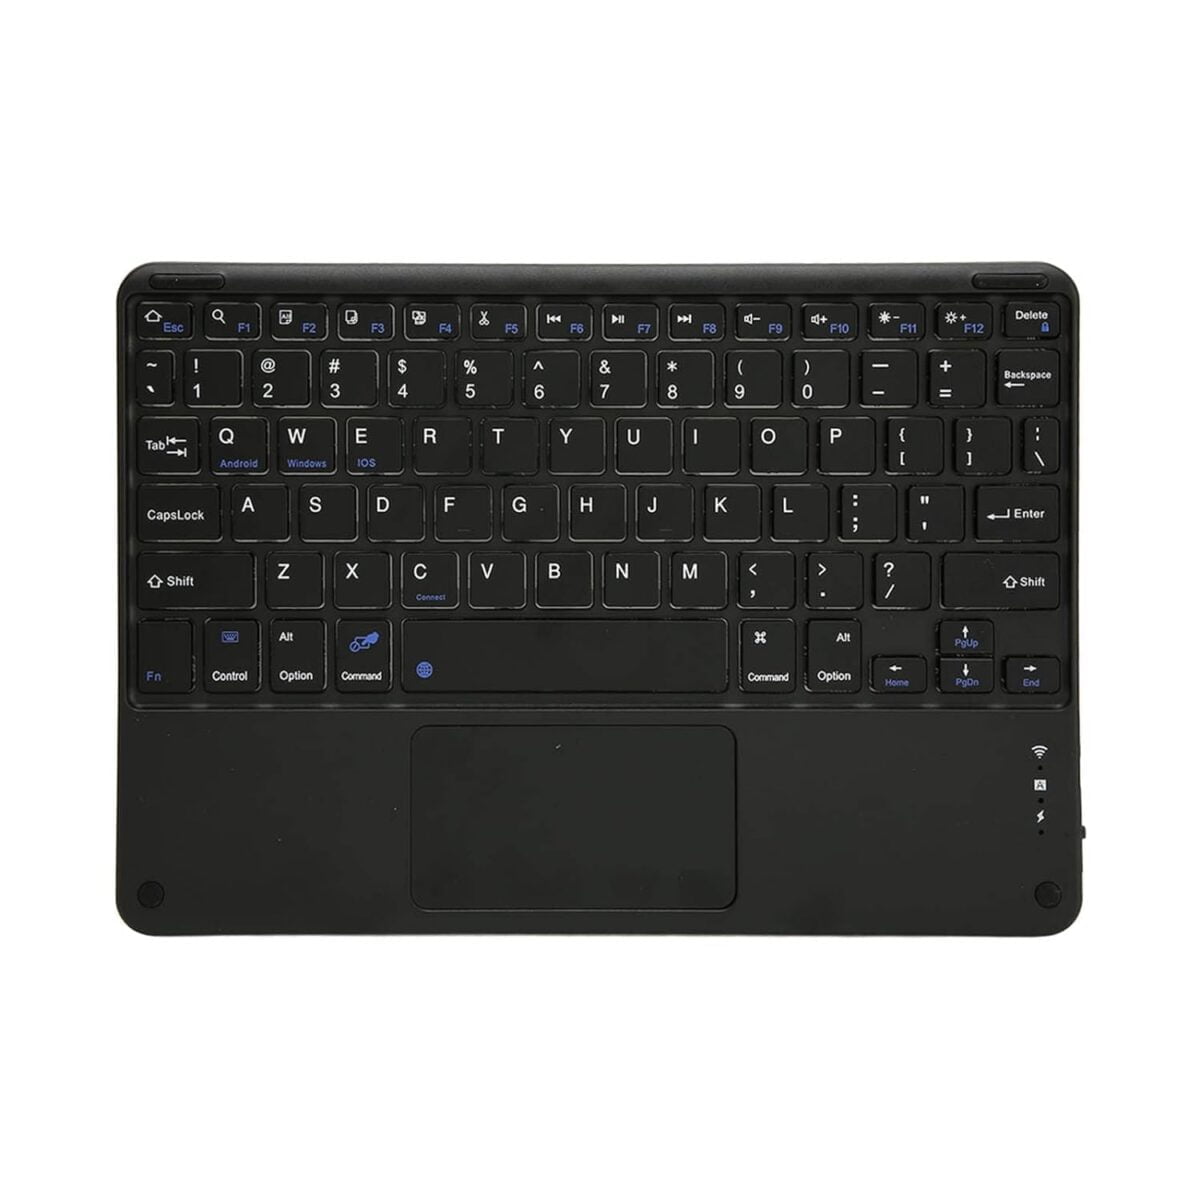 Helonics rechargeable bluetooth 5. 0 keyboard with touchpad 7 helonics rechargeable bluetooth 5. 0 keyboard with touchpad